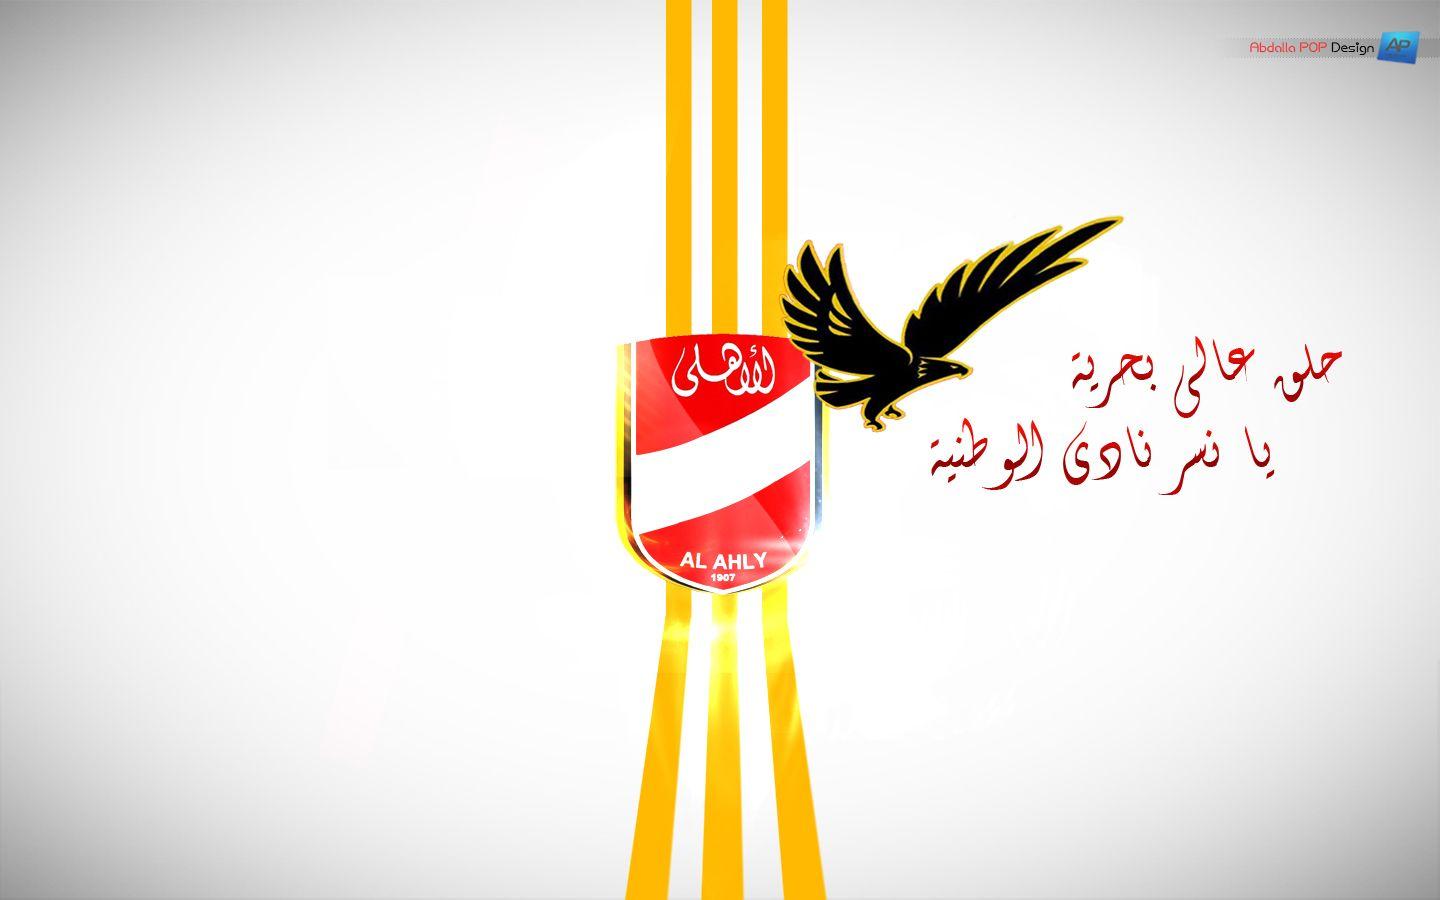 Best image about Al Ahly (1907) the club of the century